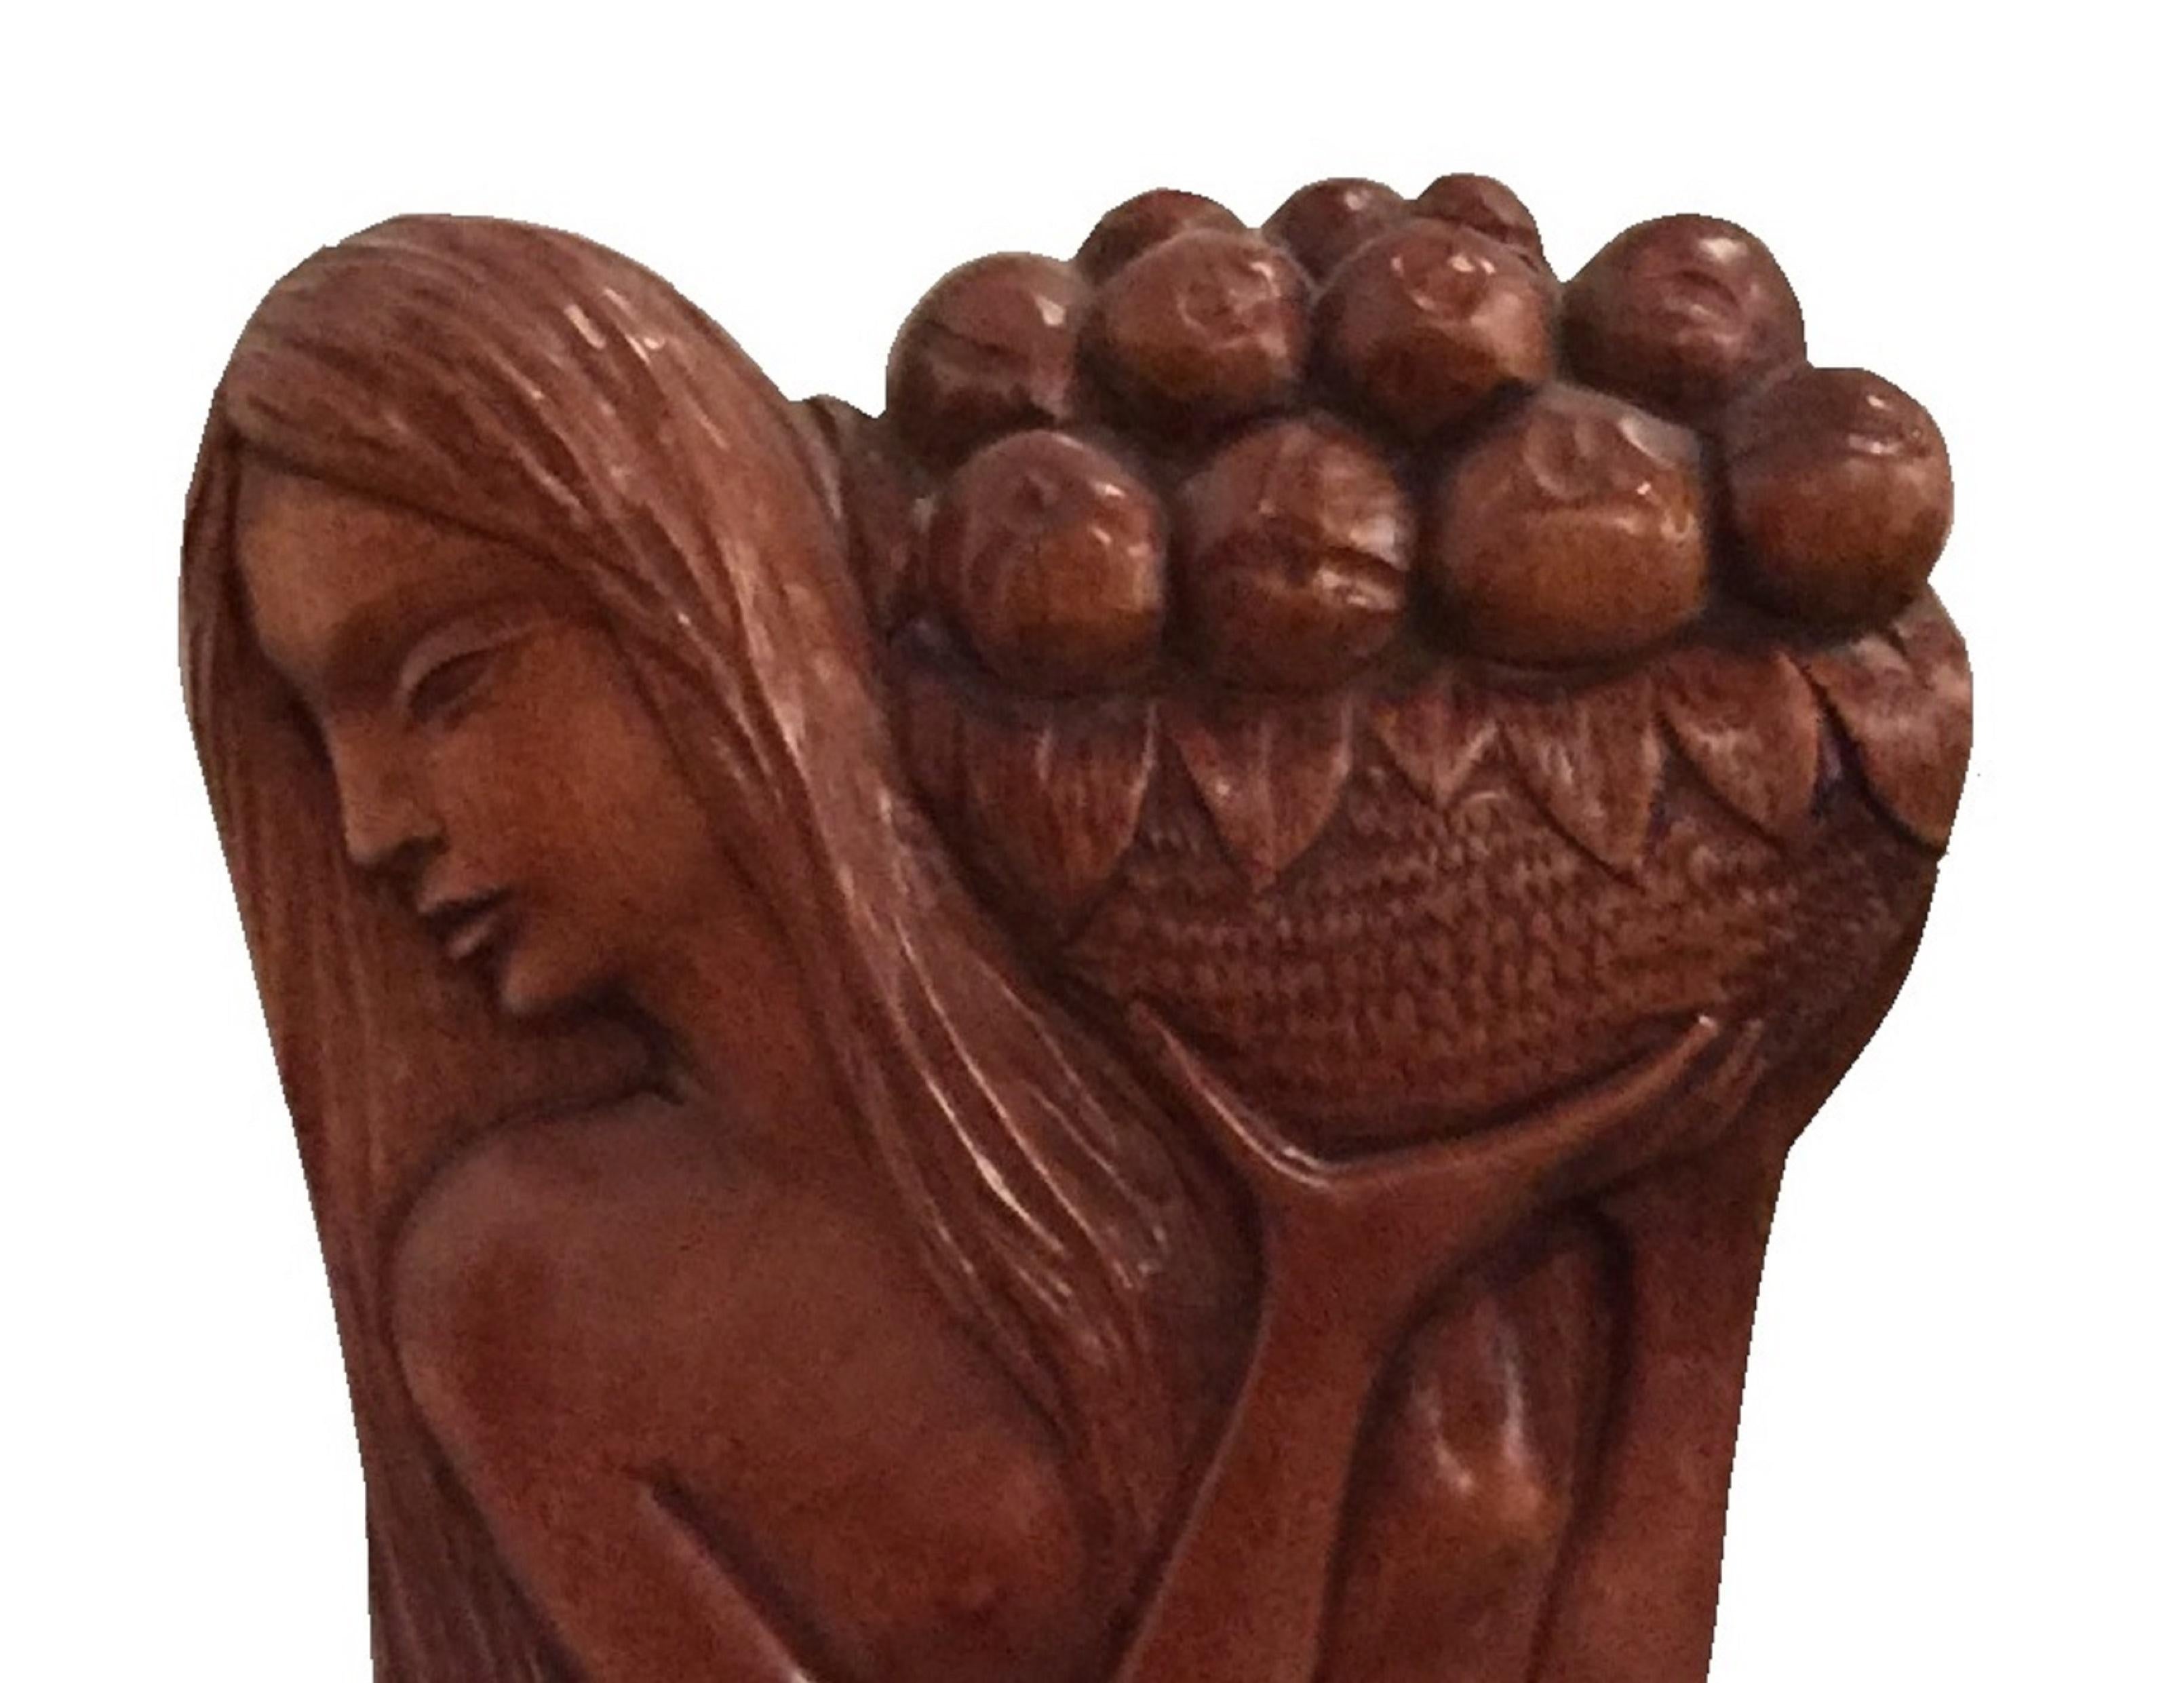 Amaizing Woman, 1940, France, Material, Wood, Sign, Zadra For Sale 1